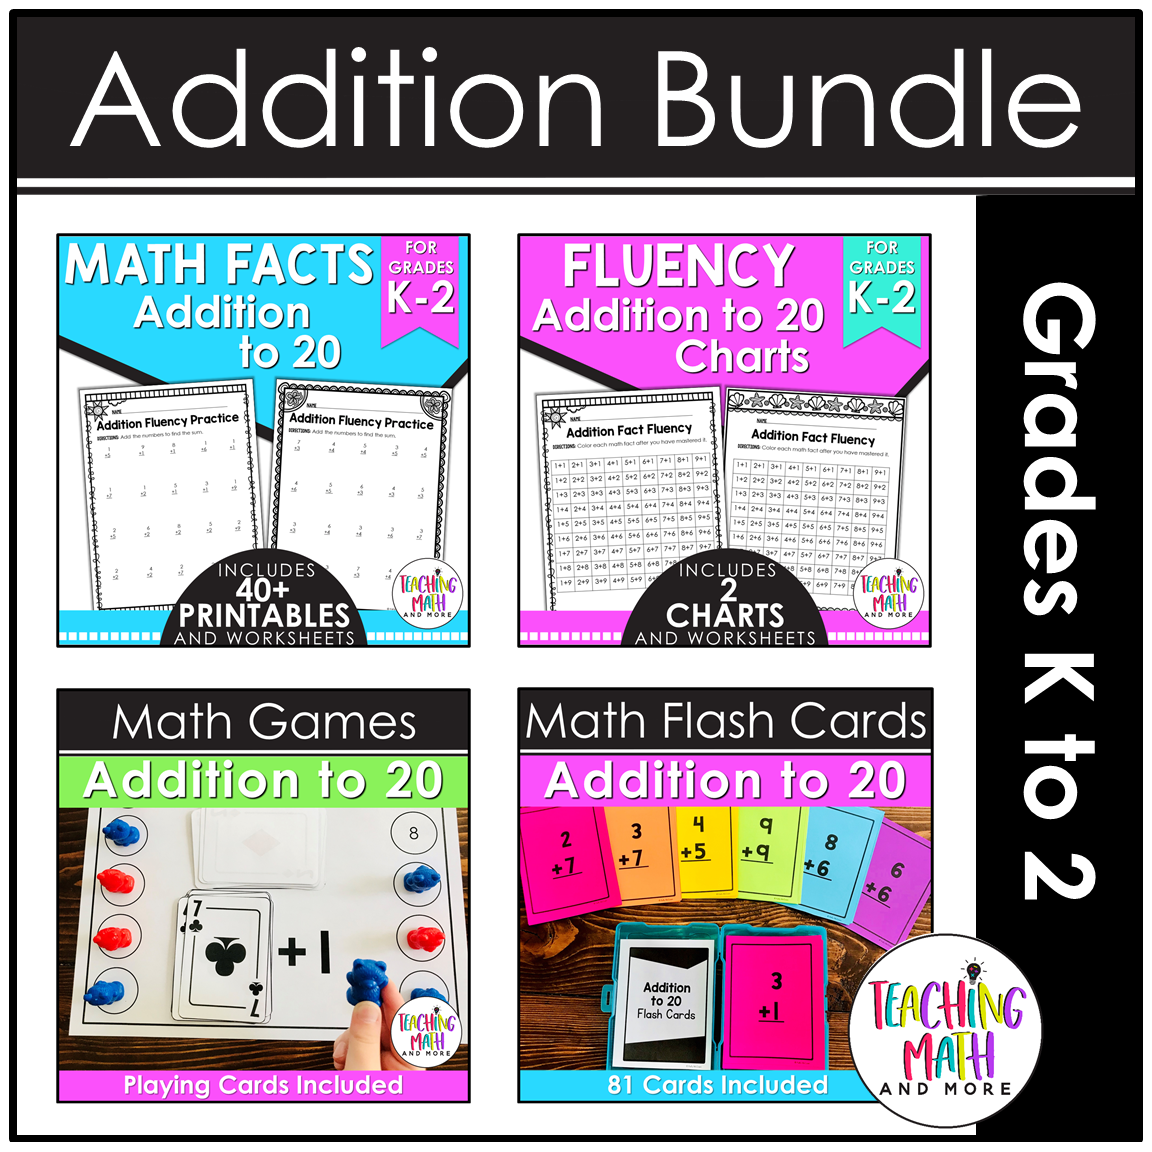 Addition to 20 Fluency Activities Bundle - Teaching Math and More